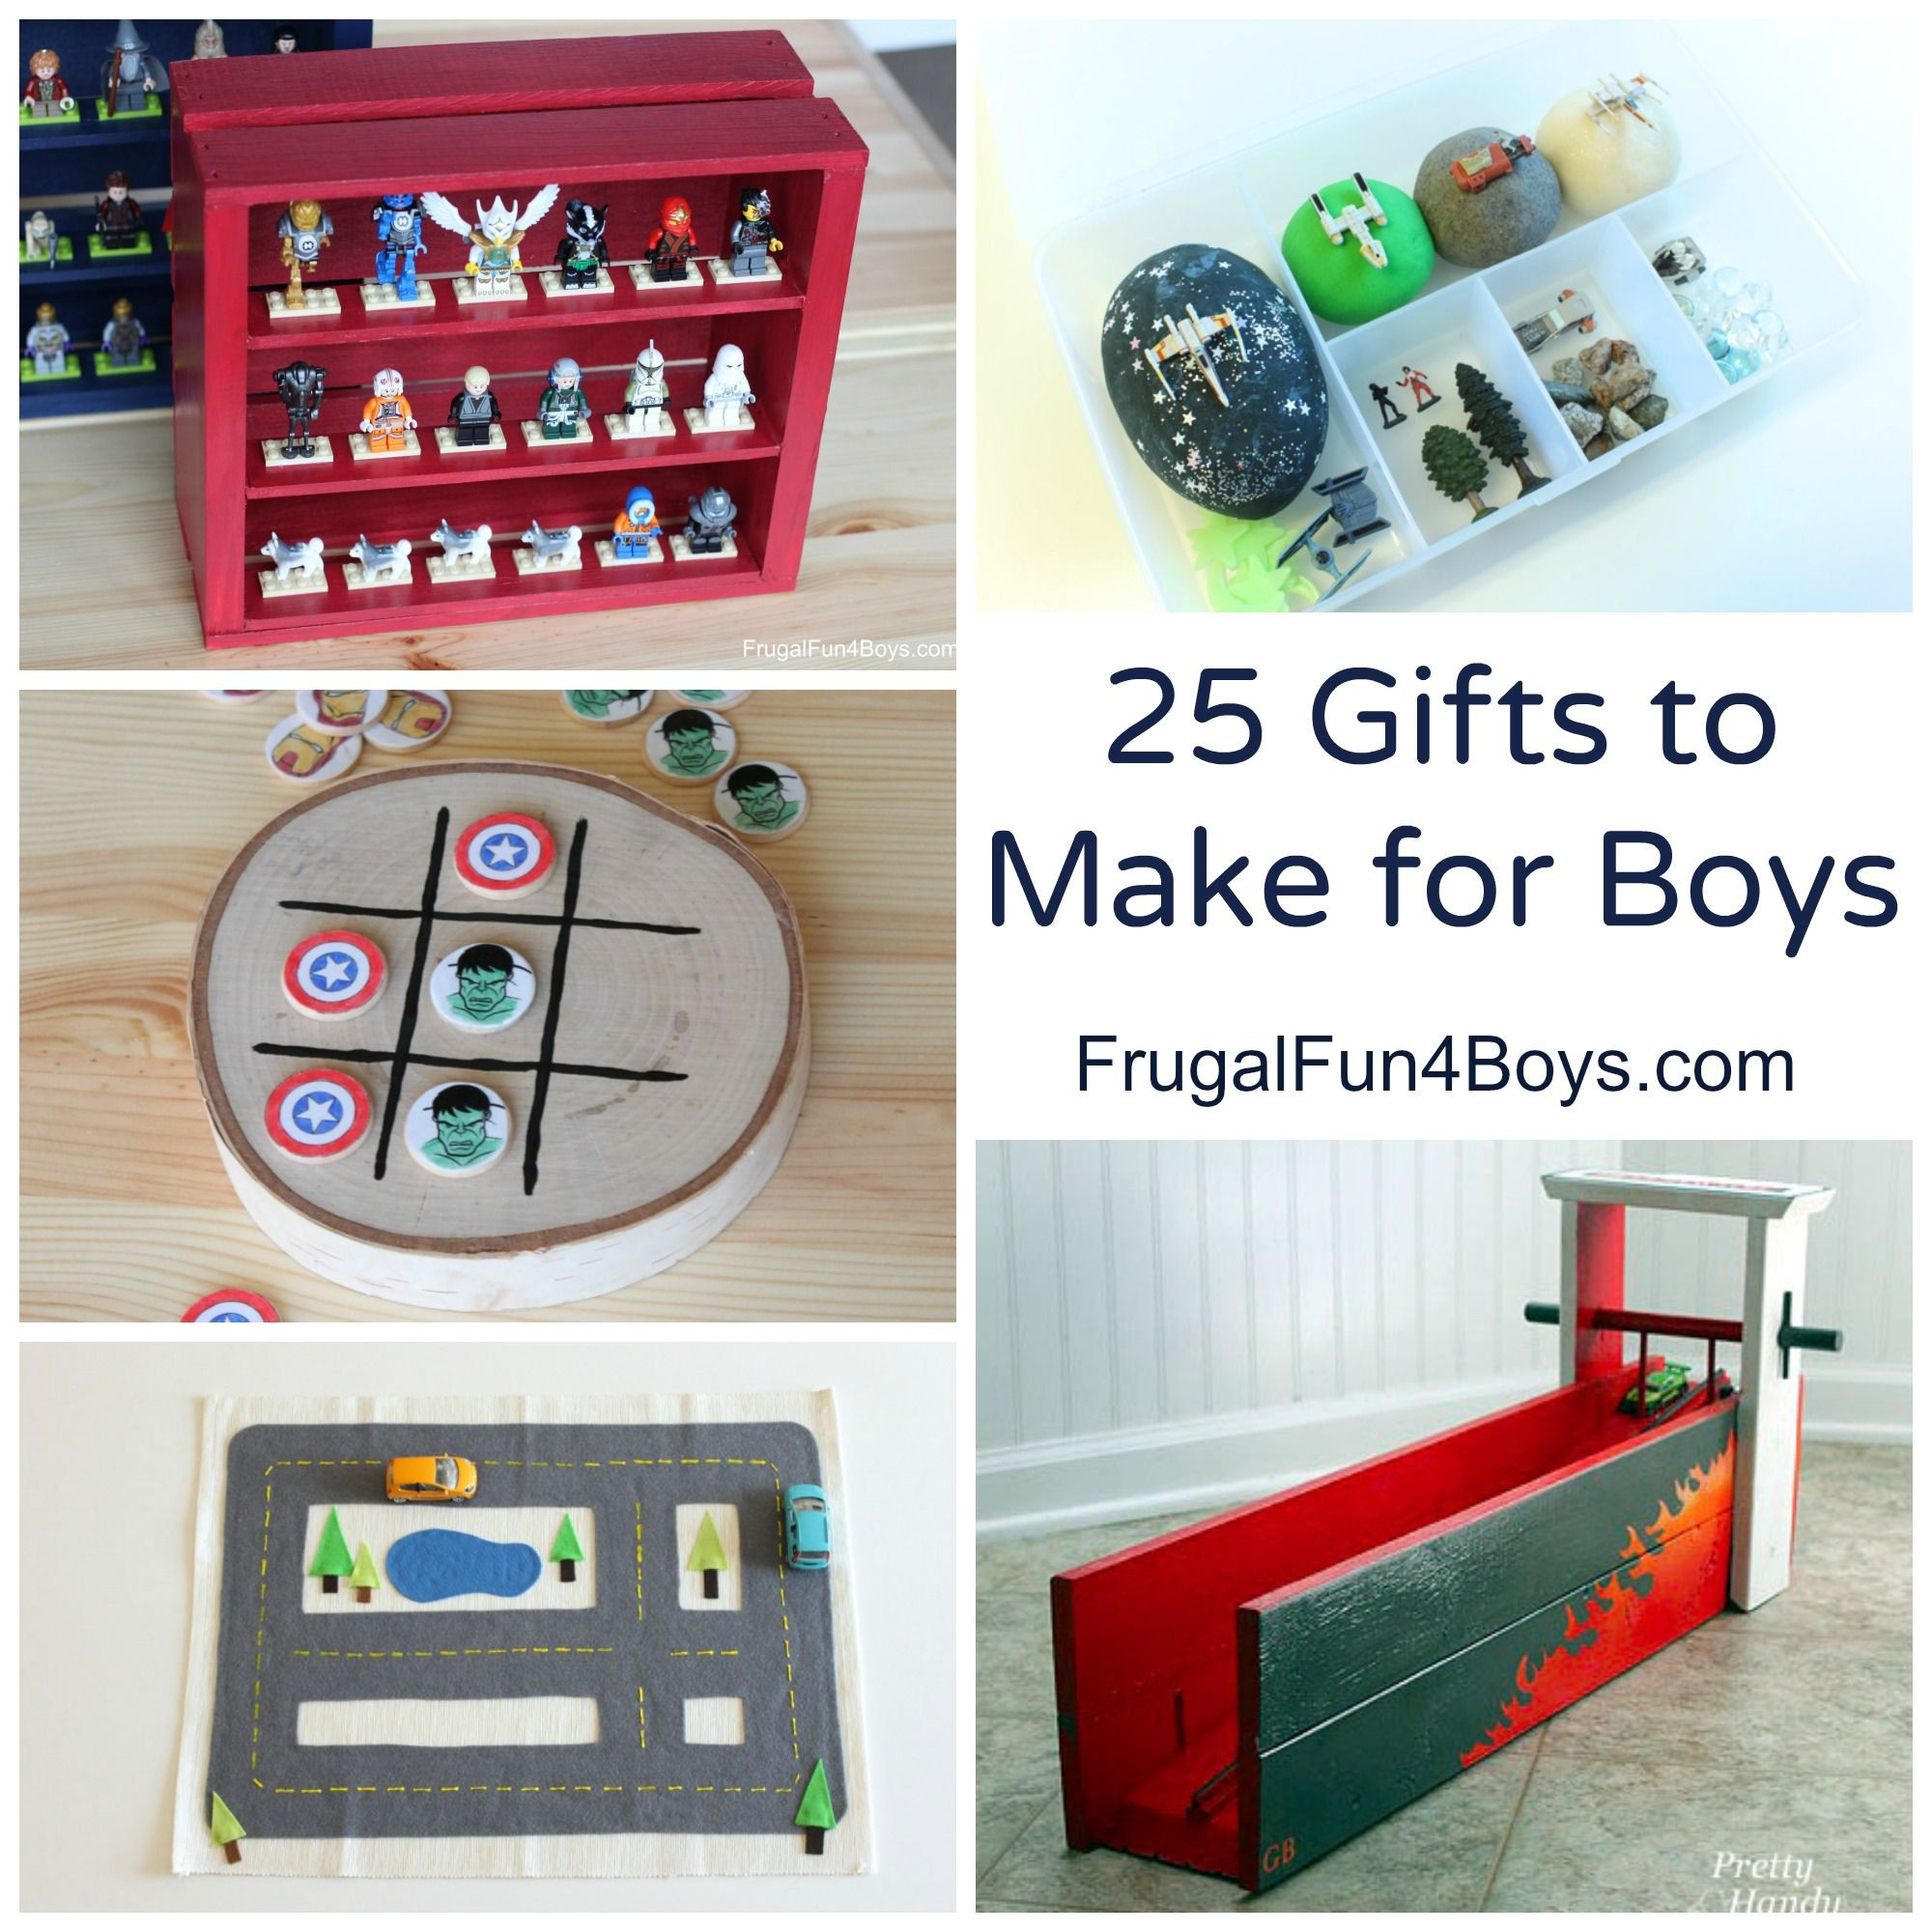 Homemade Gift Ideas For Boys
 25 More Homemade Gifts to Make for Boys